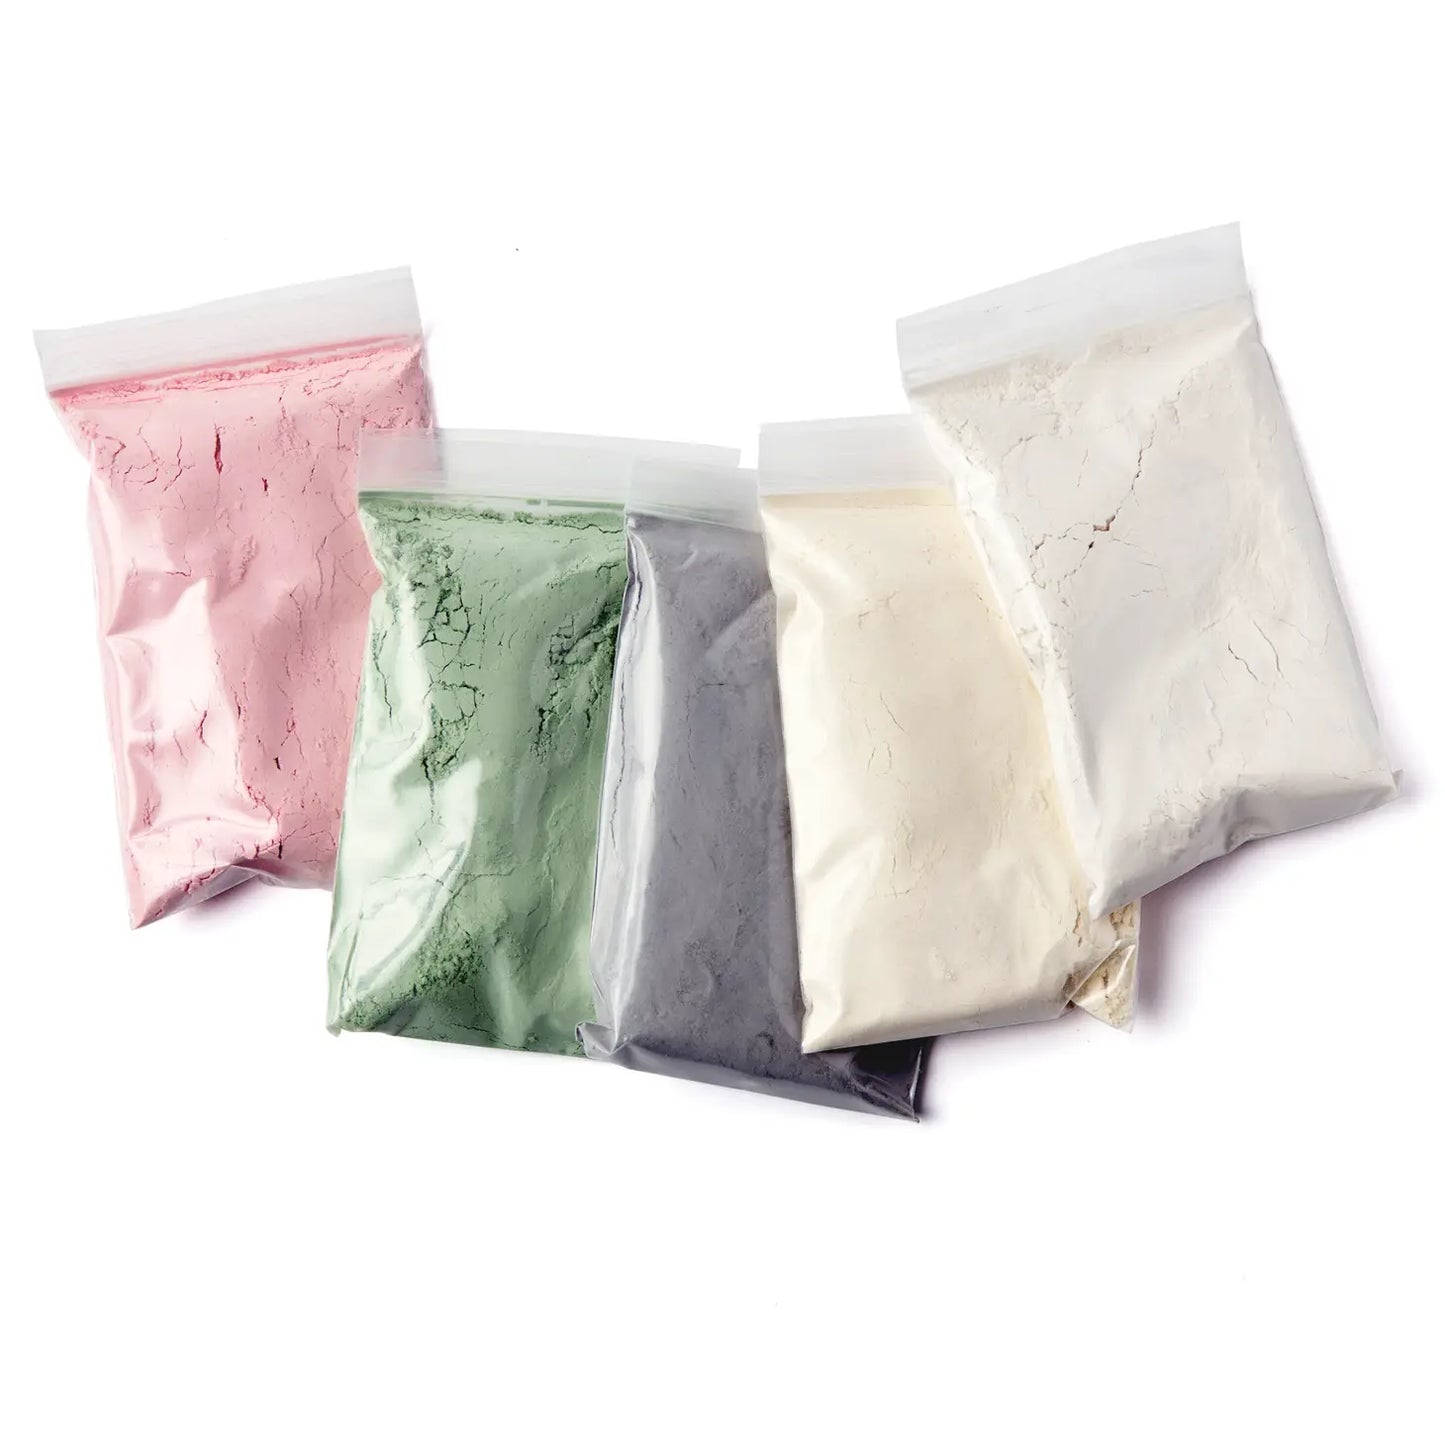 Make Your Own Eco Dough (Pack of 6)